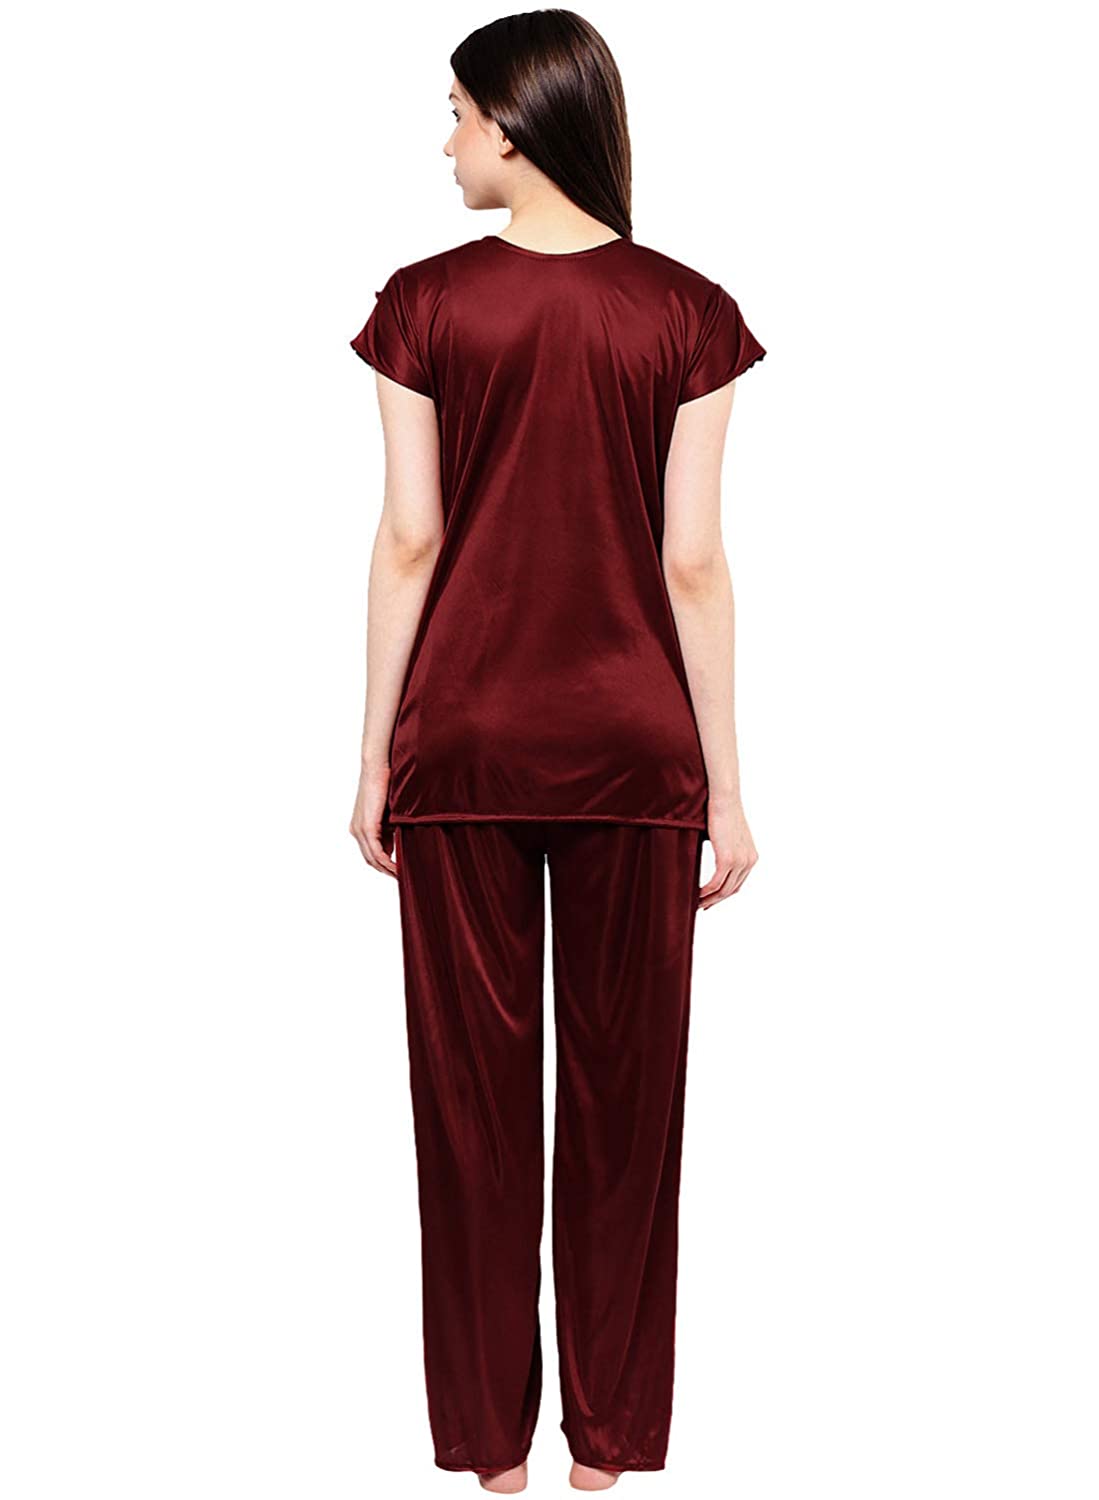 Phalin Women's Satin Plain/Solid Night Suit Set Pack of 2 -  nighties and night dresses in Sri Lanka from Arcade Online Shopping - Just Rs. 5699!